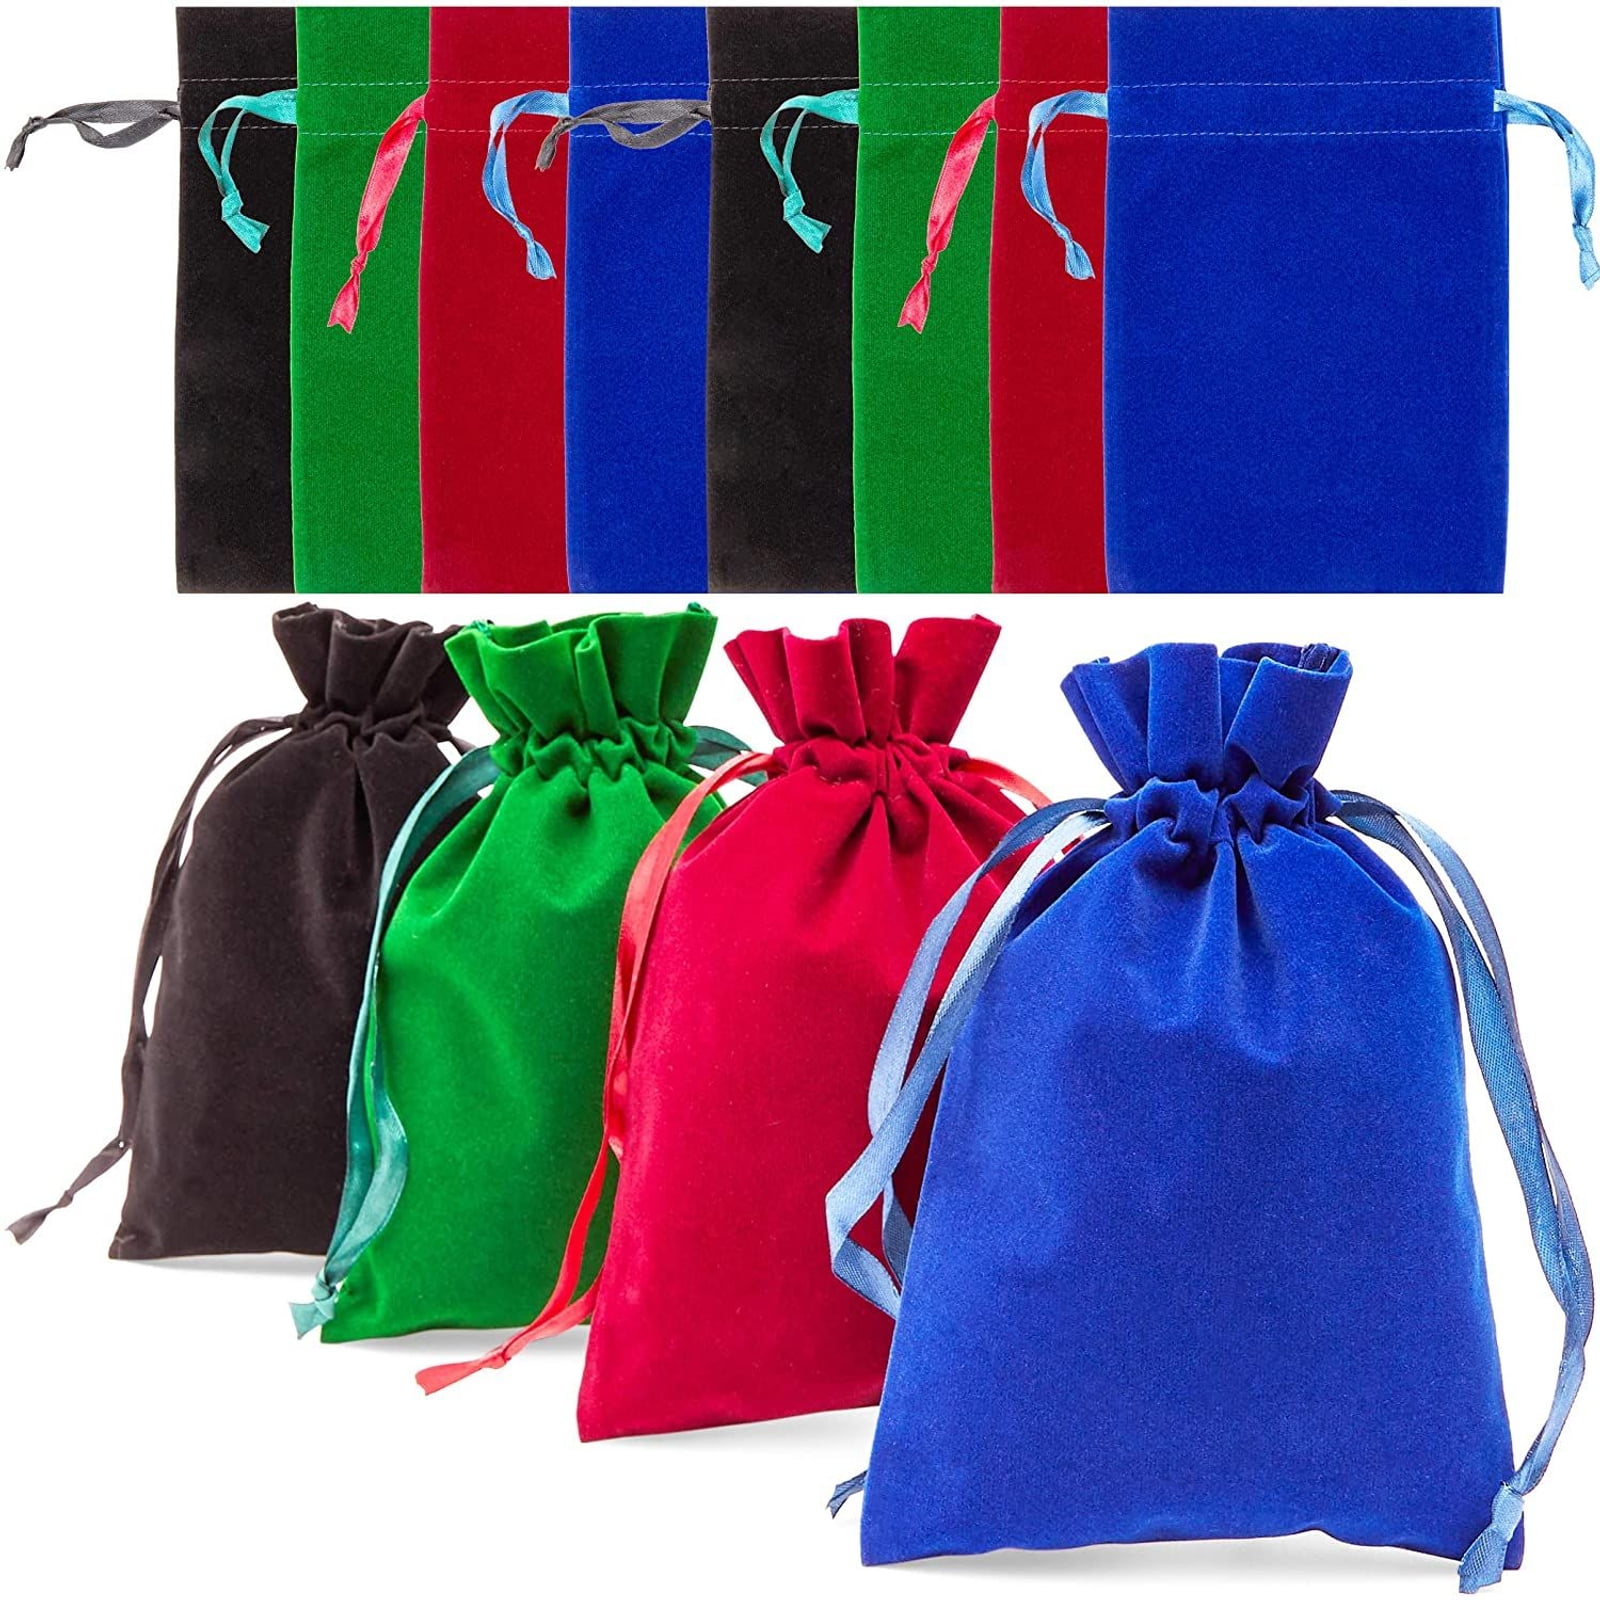 50pcs Velvet Jewelry Drawstring Pouch Wedding Party Favor Packing Gift Bags 